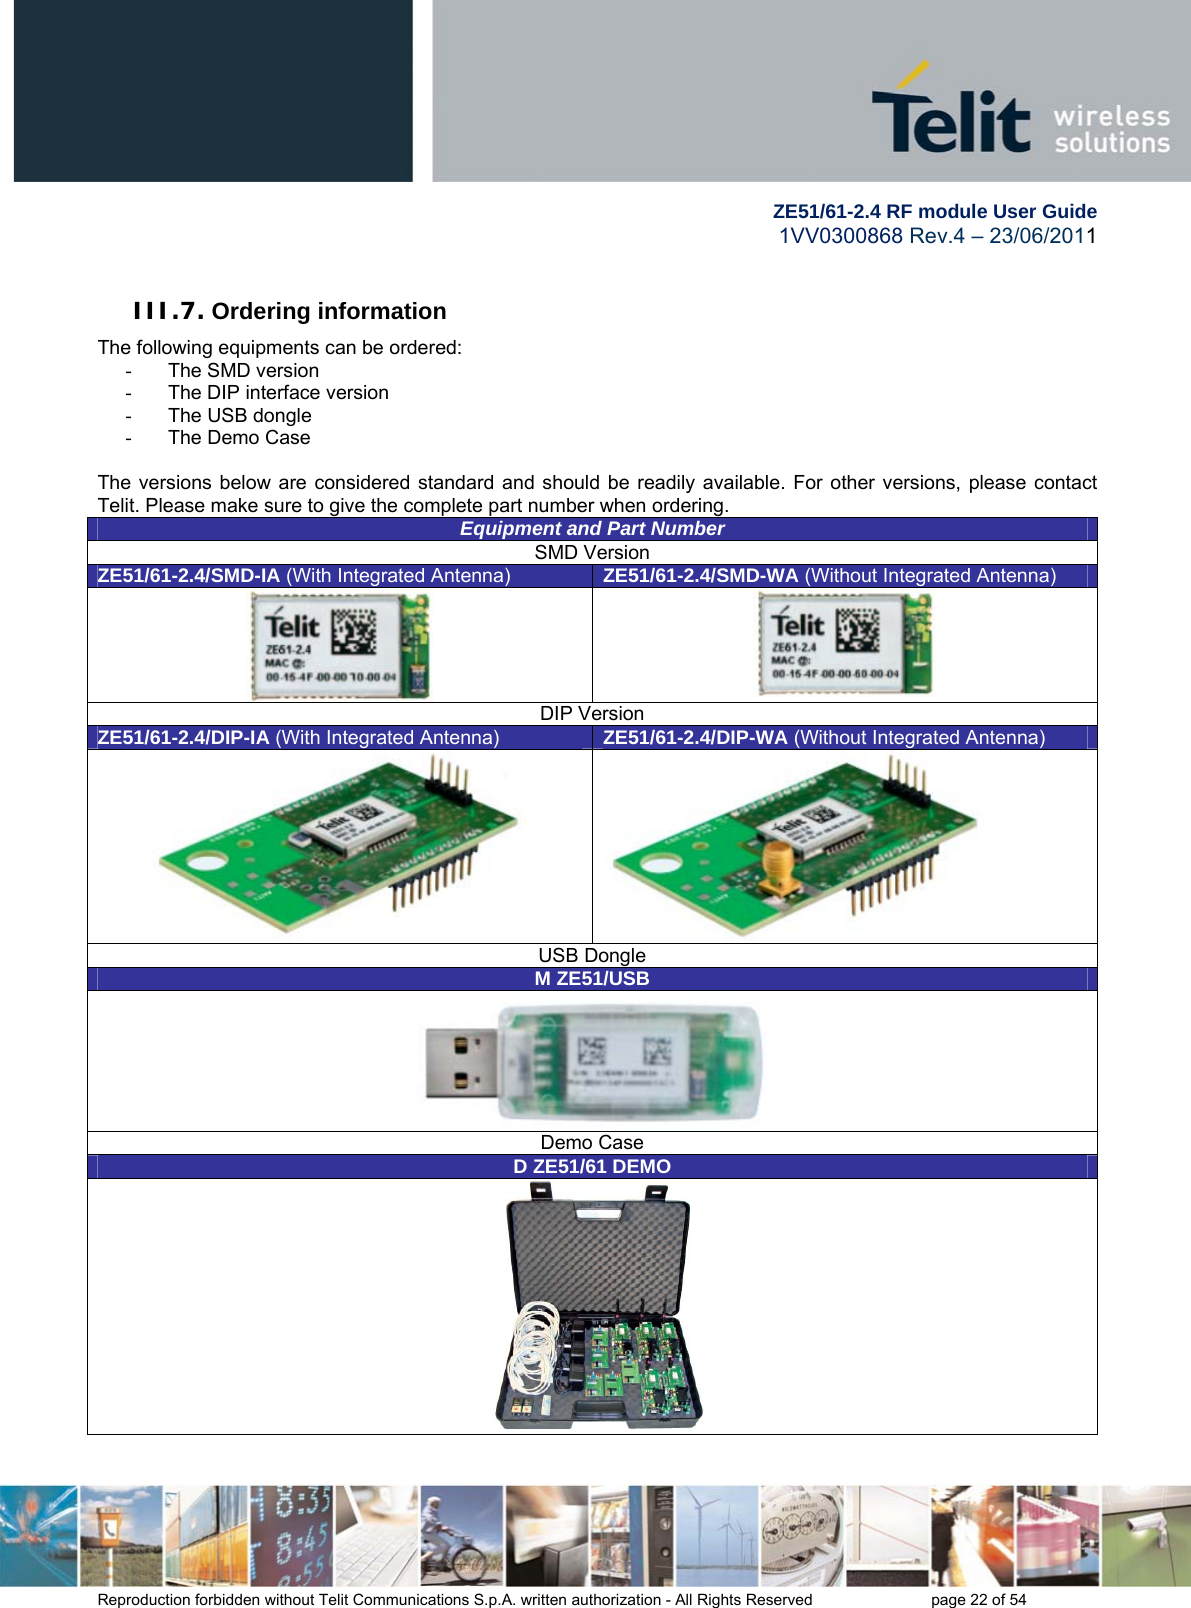         ZE51/61-2.4 RF module User Guide 1VV0300868 Rev.4 – 23/06/2011 Reproduction forbidden without Telit Communications S.p.A. written authorization - All Rights Reserved    page 22 of 54  III.7. Ordering information The following equipments can be ordered: - The SMD version -  The DIP interface version -  The USB dongle  -  The Demo Case  The versions below are considered standard and should be readily available. For other versions, please contact Telit. Please make sure to give the complete part number when ordering. Equipment and Part NumberSMD Version ZE51/61-2.4/SMD-IA (With Integrated Antenna)  ZE51/61-2.4/SMD-WA (Without Integrated Antenna)   DIP Version ZE51/61-2.4/DIP-IA (With Integrated Antenna)  ZE51/61-2.4/DIP-WA (Without Integrated Antenna)  USB Dongle M ZE51/USB Demo Case D ZE51/61 DEMO